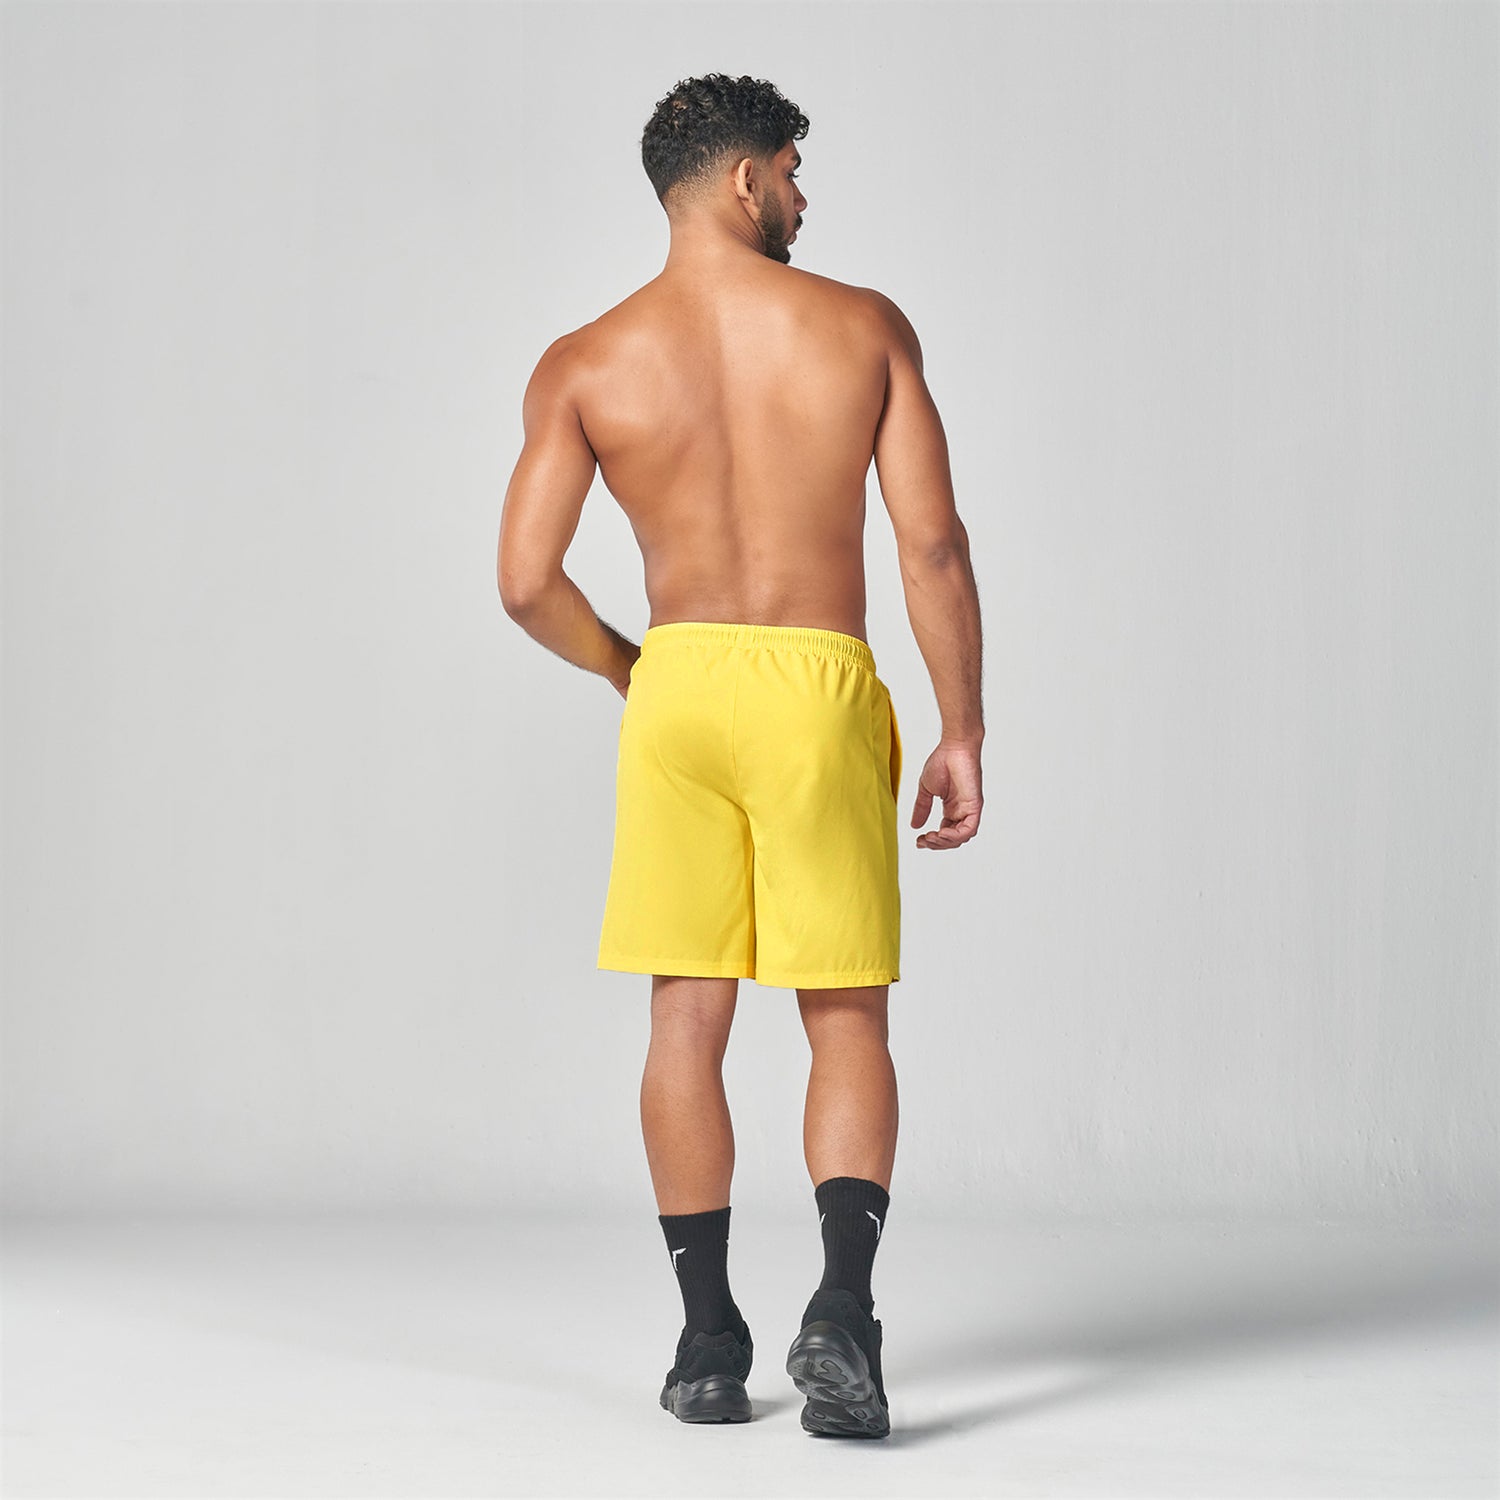 squatwolf-gym-wear-essential-7-inch-shorts-yellow-workout-short-for-men